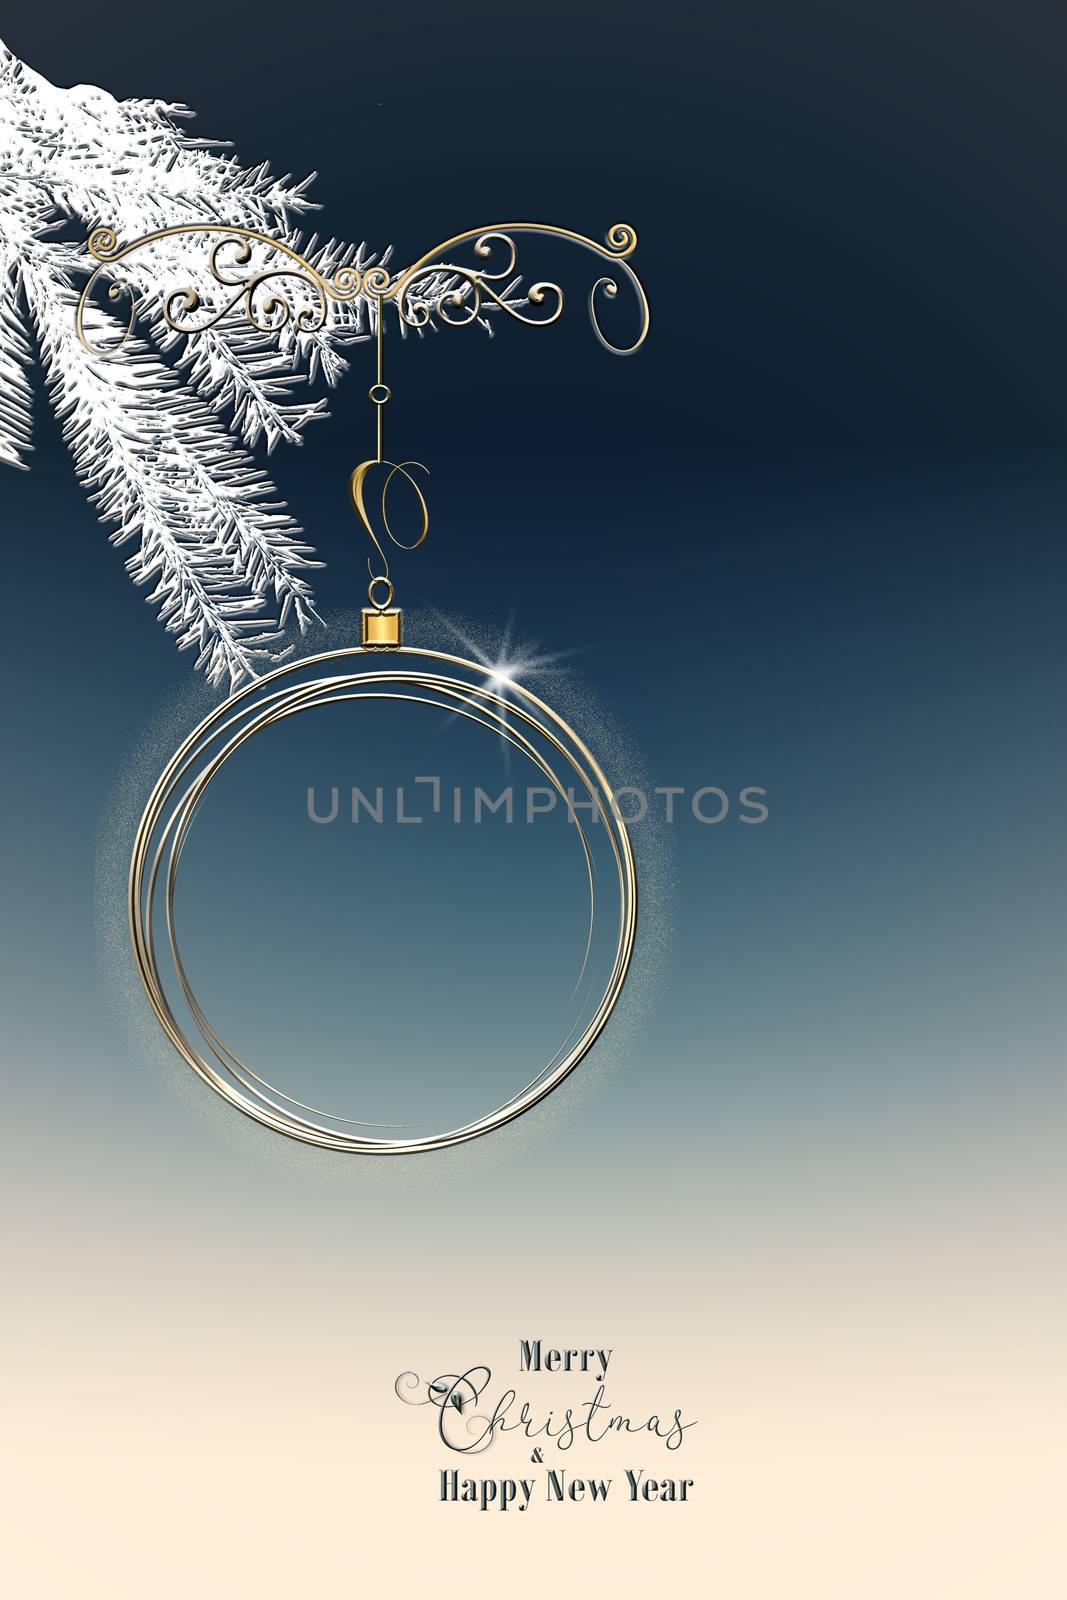 Gold shiny Christmas ball with fir brunch on blue background. Text Merry Christmas Happy New Year. 3D illustration